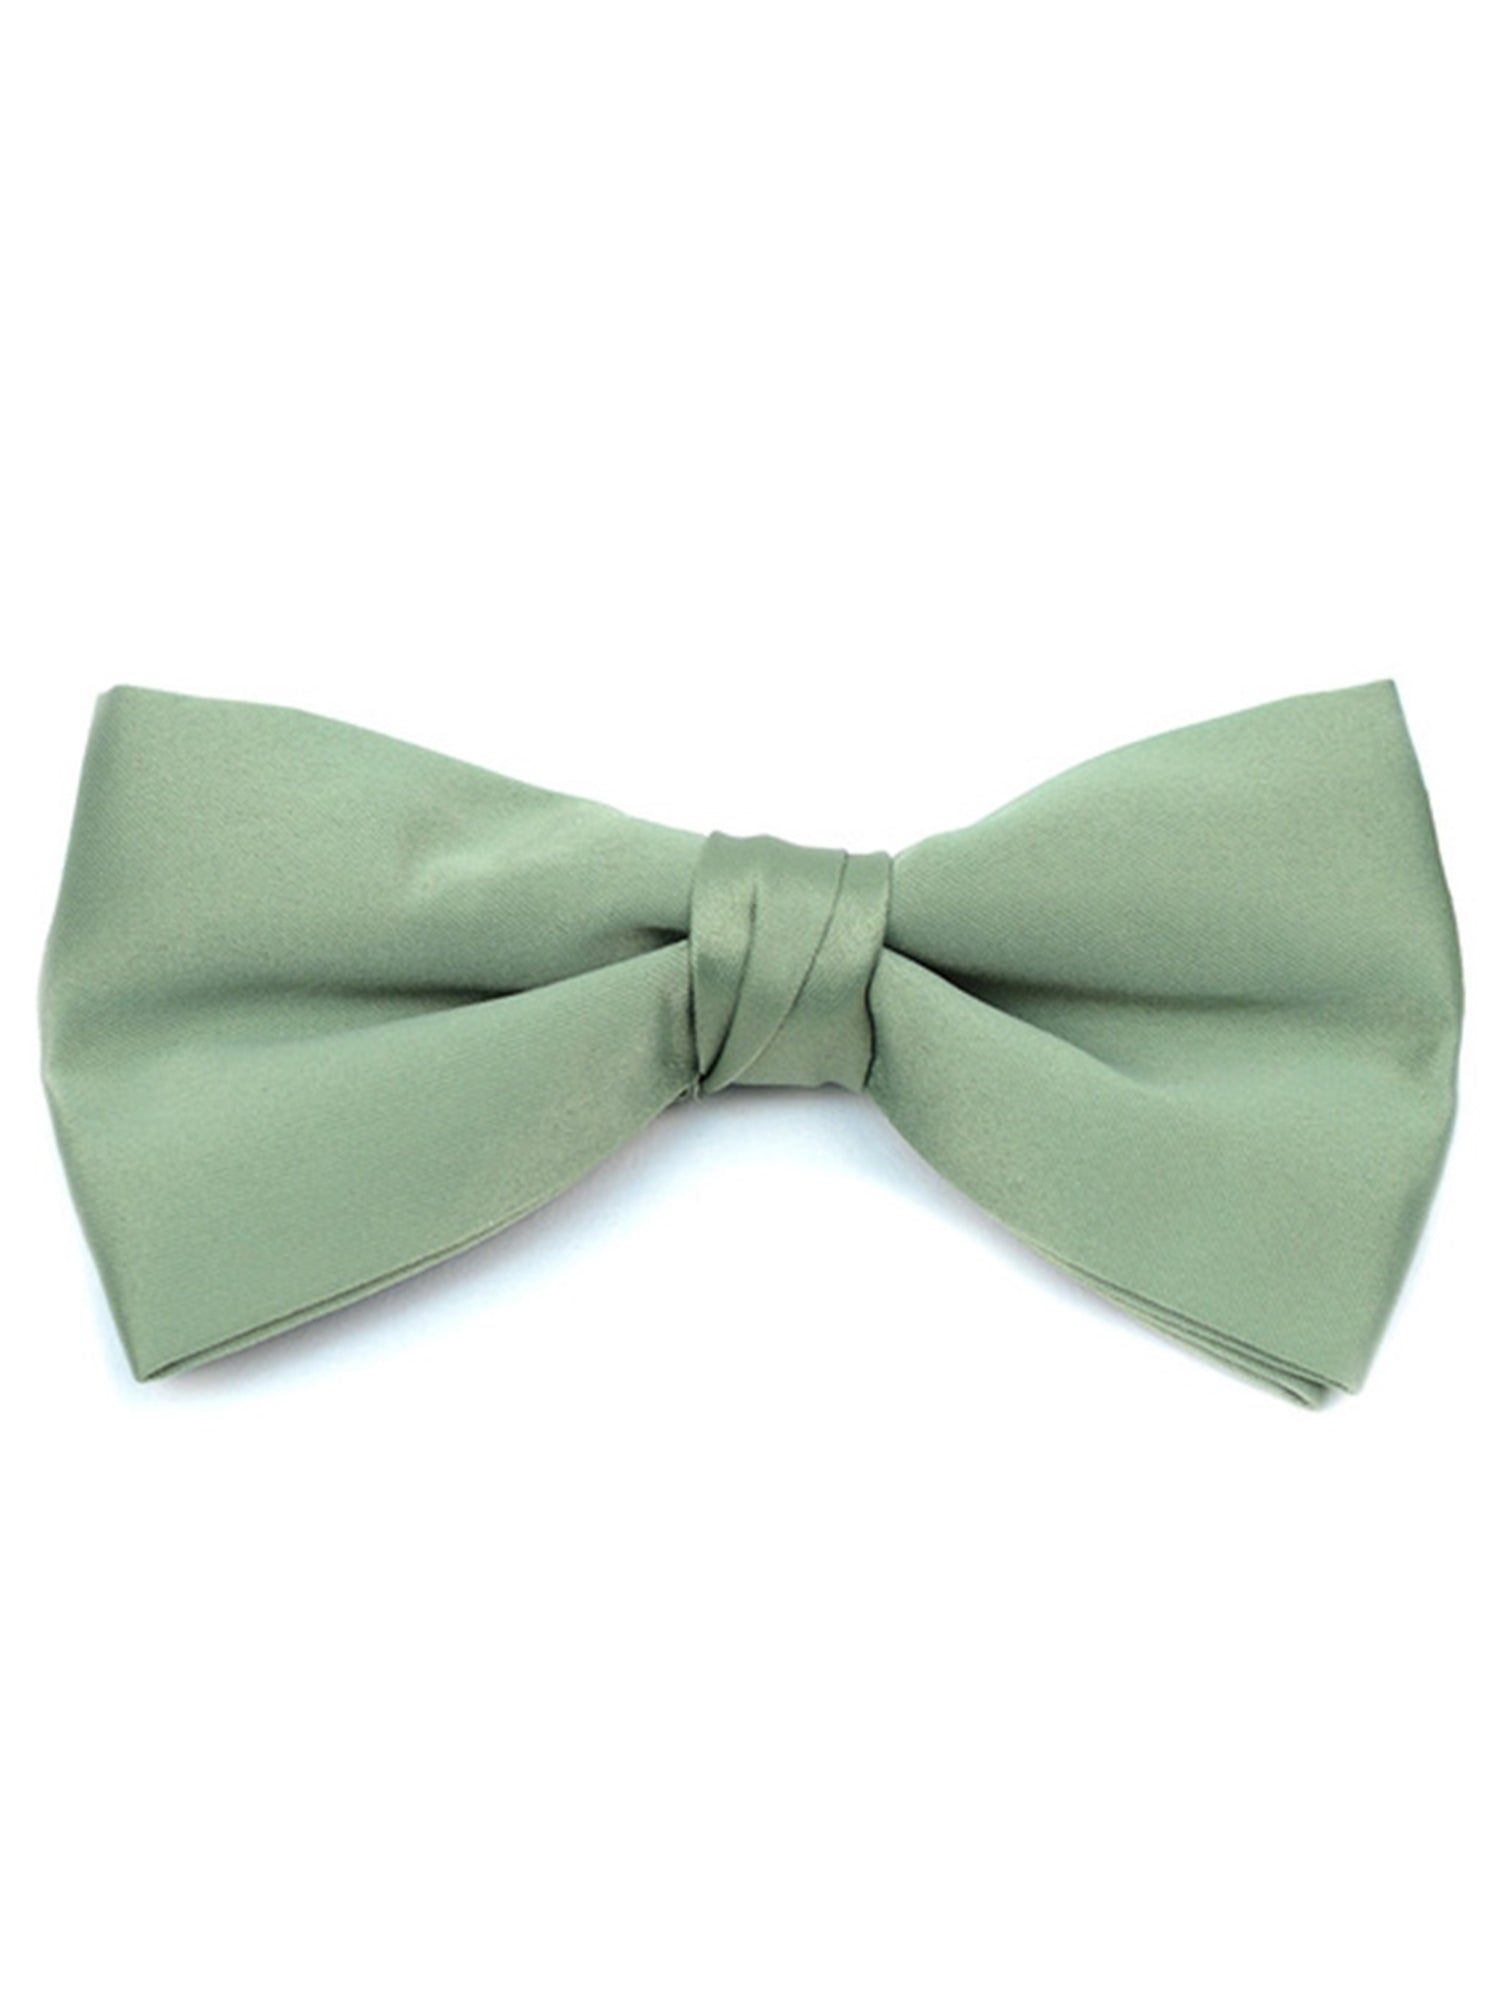 Young Boy's Pre-tied Adjustable Length Bow Tie - Formal Tuxedo Solid Color Boy's Solid Color Bow Tie TheDapperTie Sage One Size 